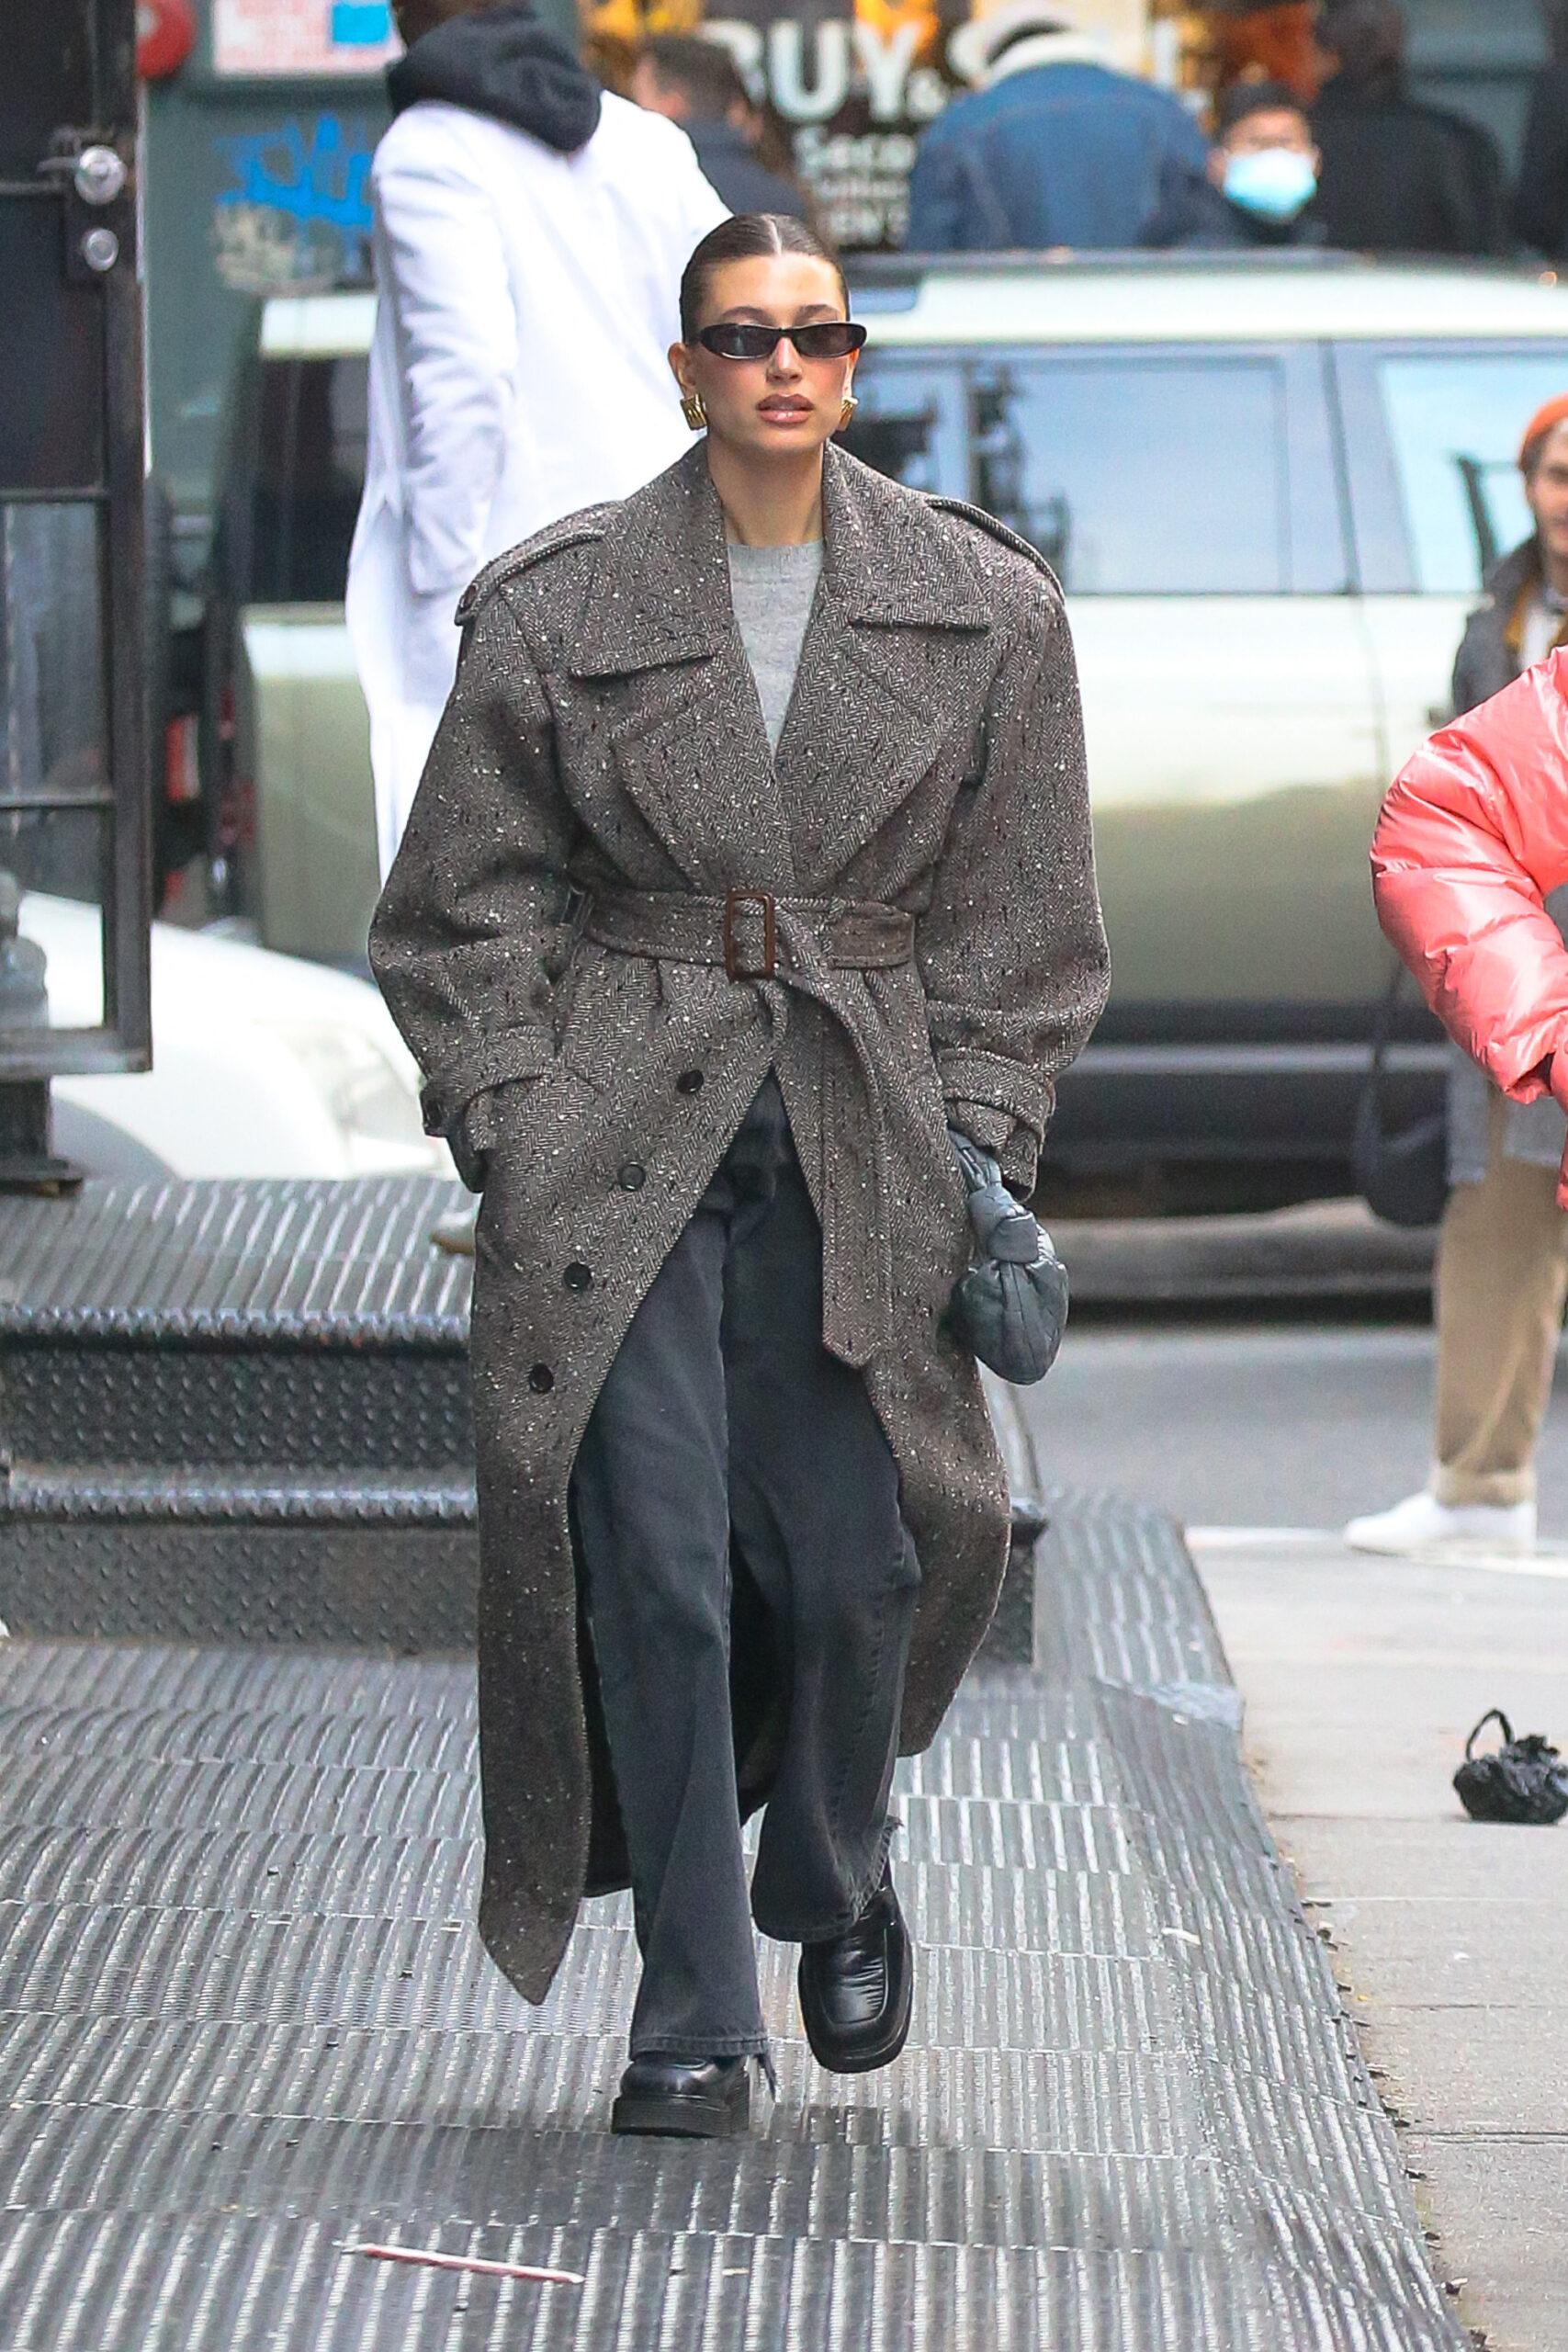 Hailey Bieber spotted shopping in SoHo, New York City